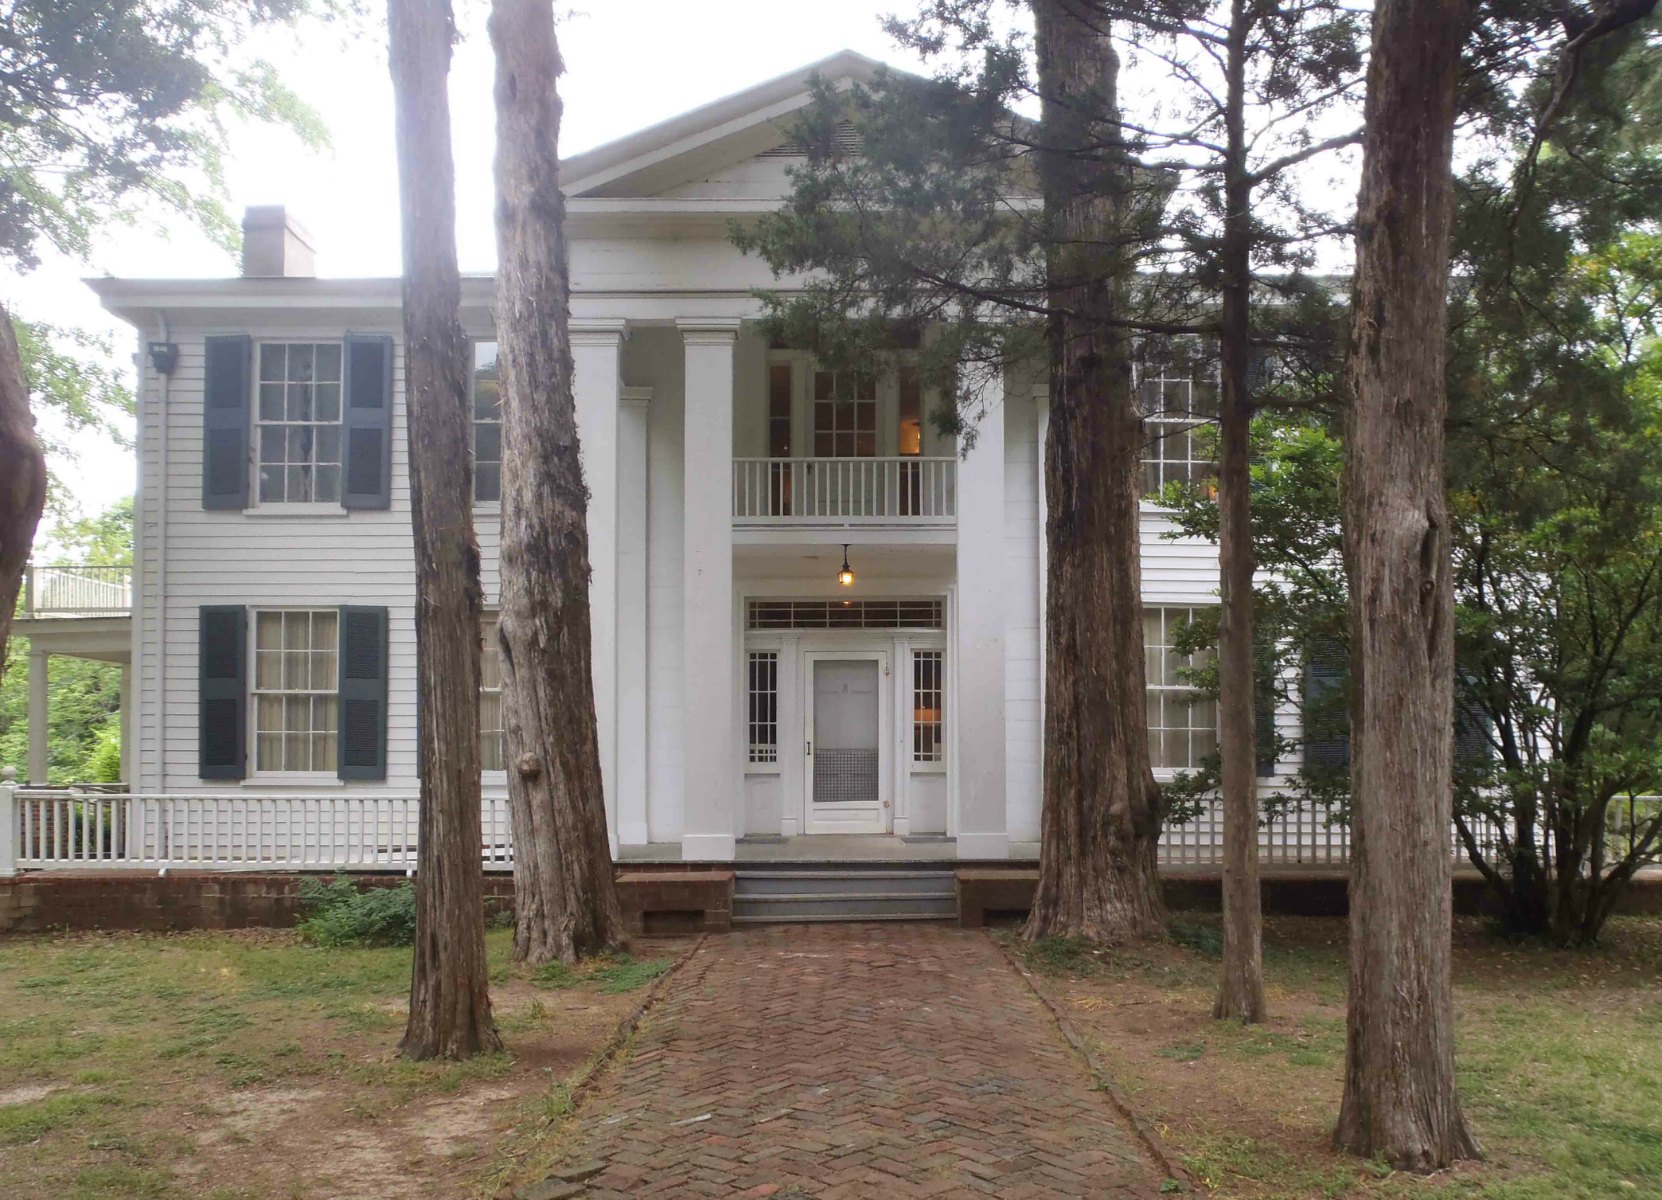 The entrance to Rowan Oak, William Faulkner's home from 1930 until his death in 1962.